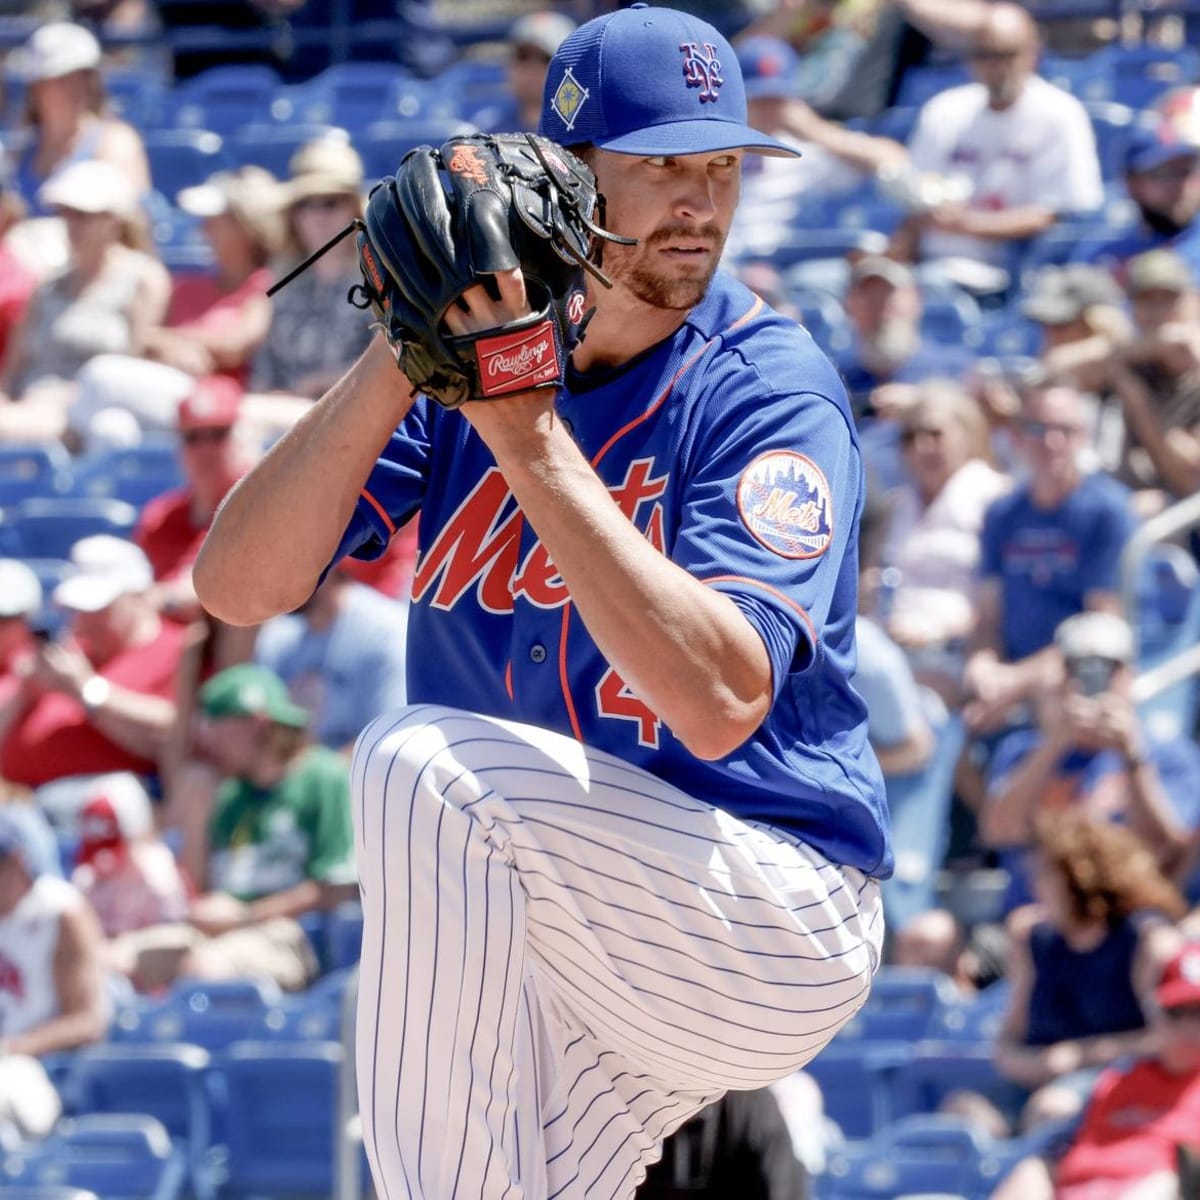 Mets ace Jacob deGrom out at least a month with shoulder injury